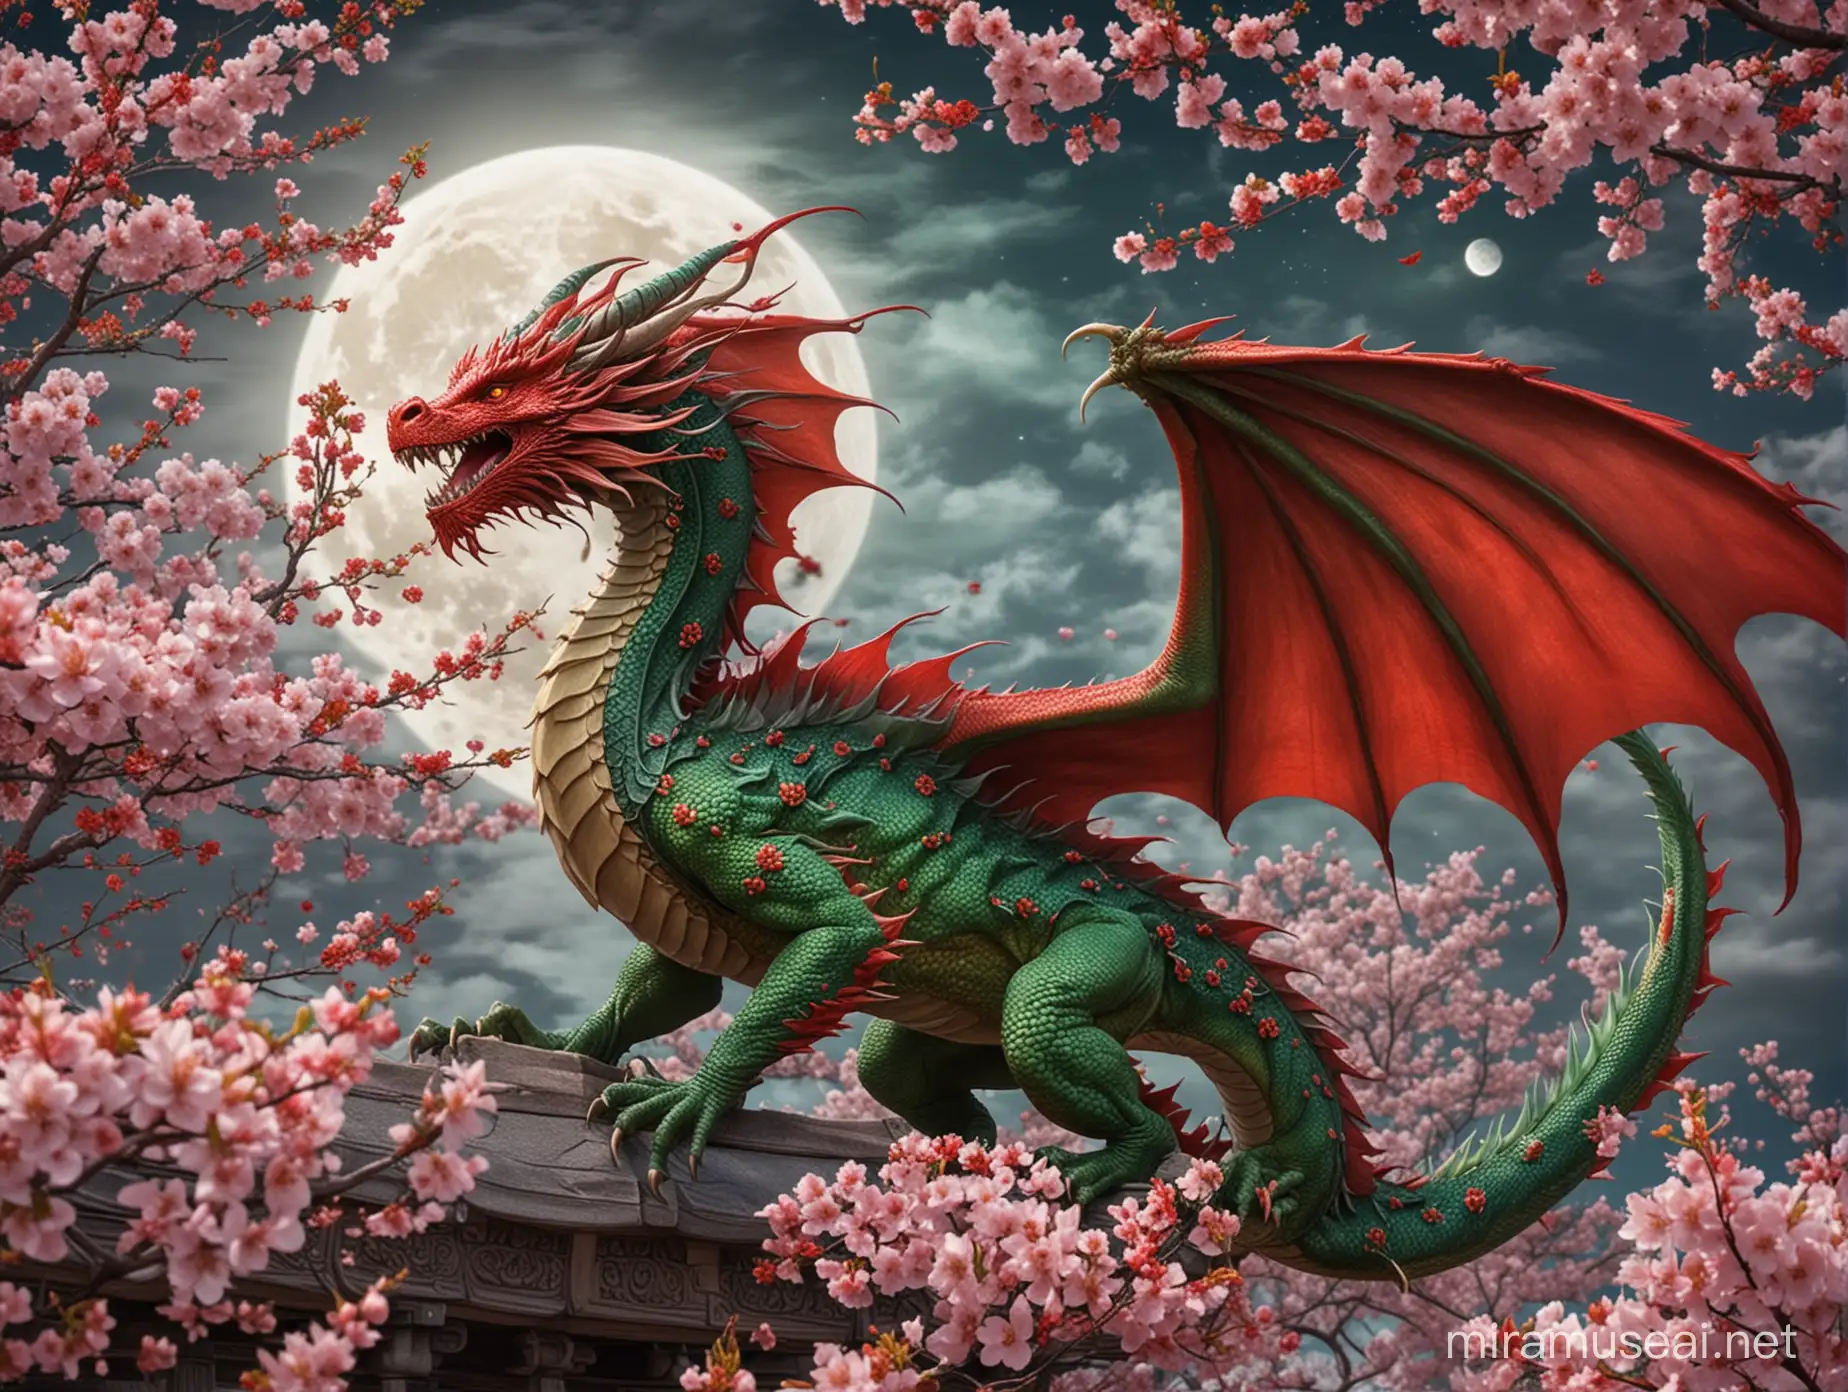 Majestic Red and Green Dragon Emerging from Blossoms Under the Moonlight